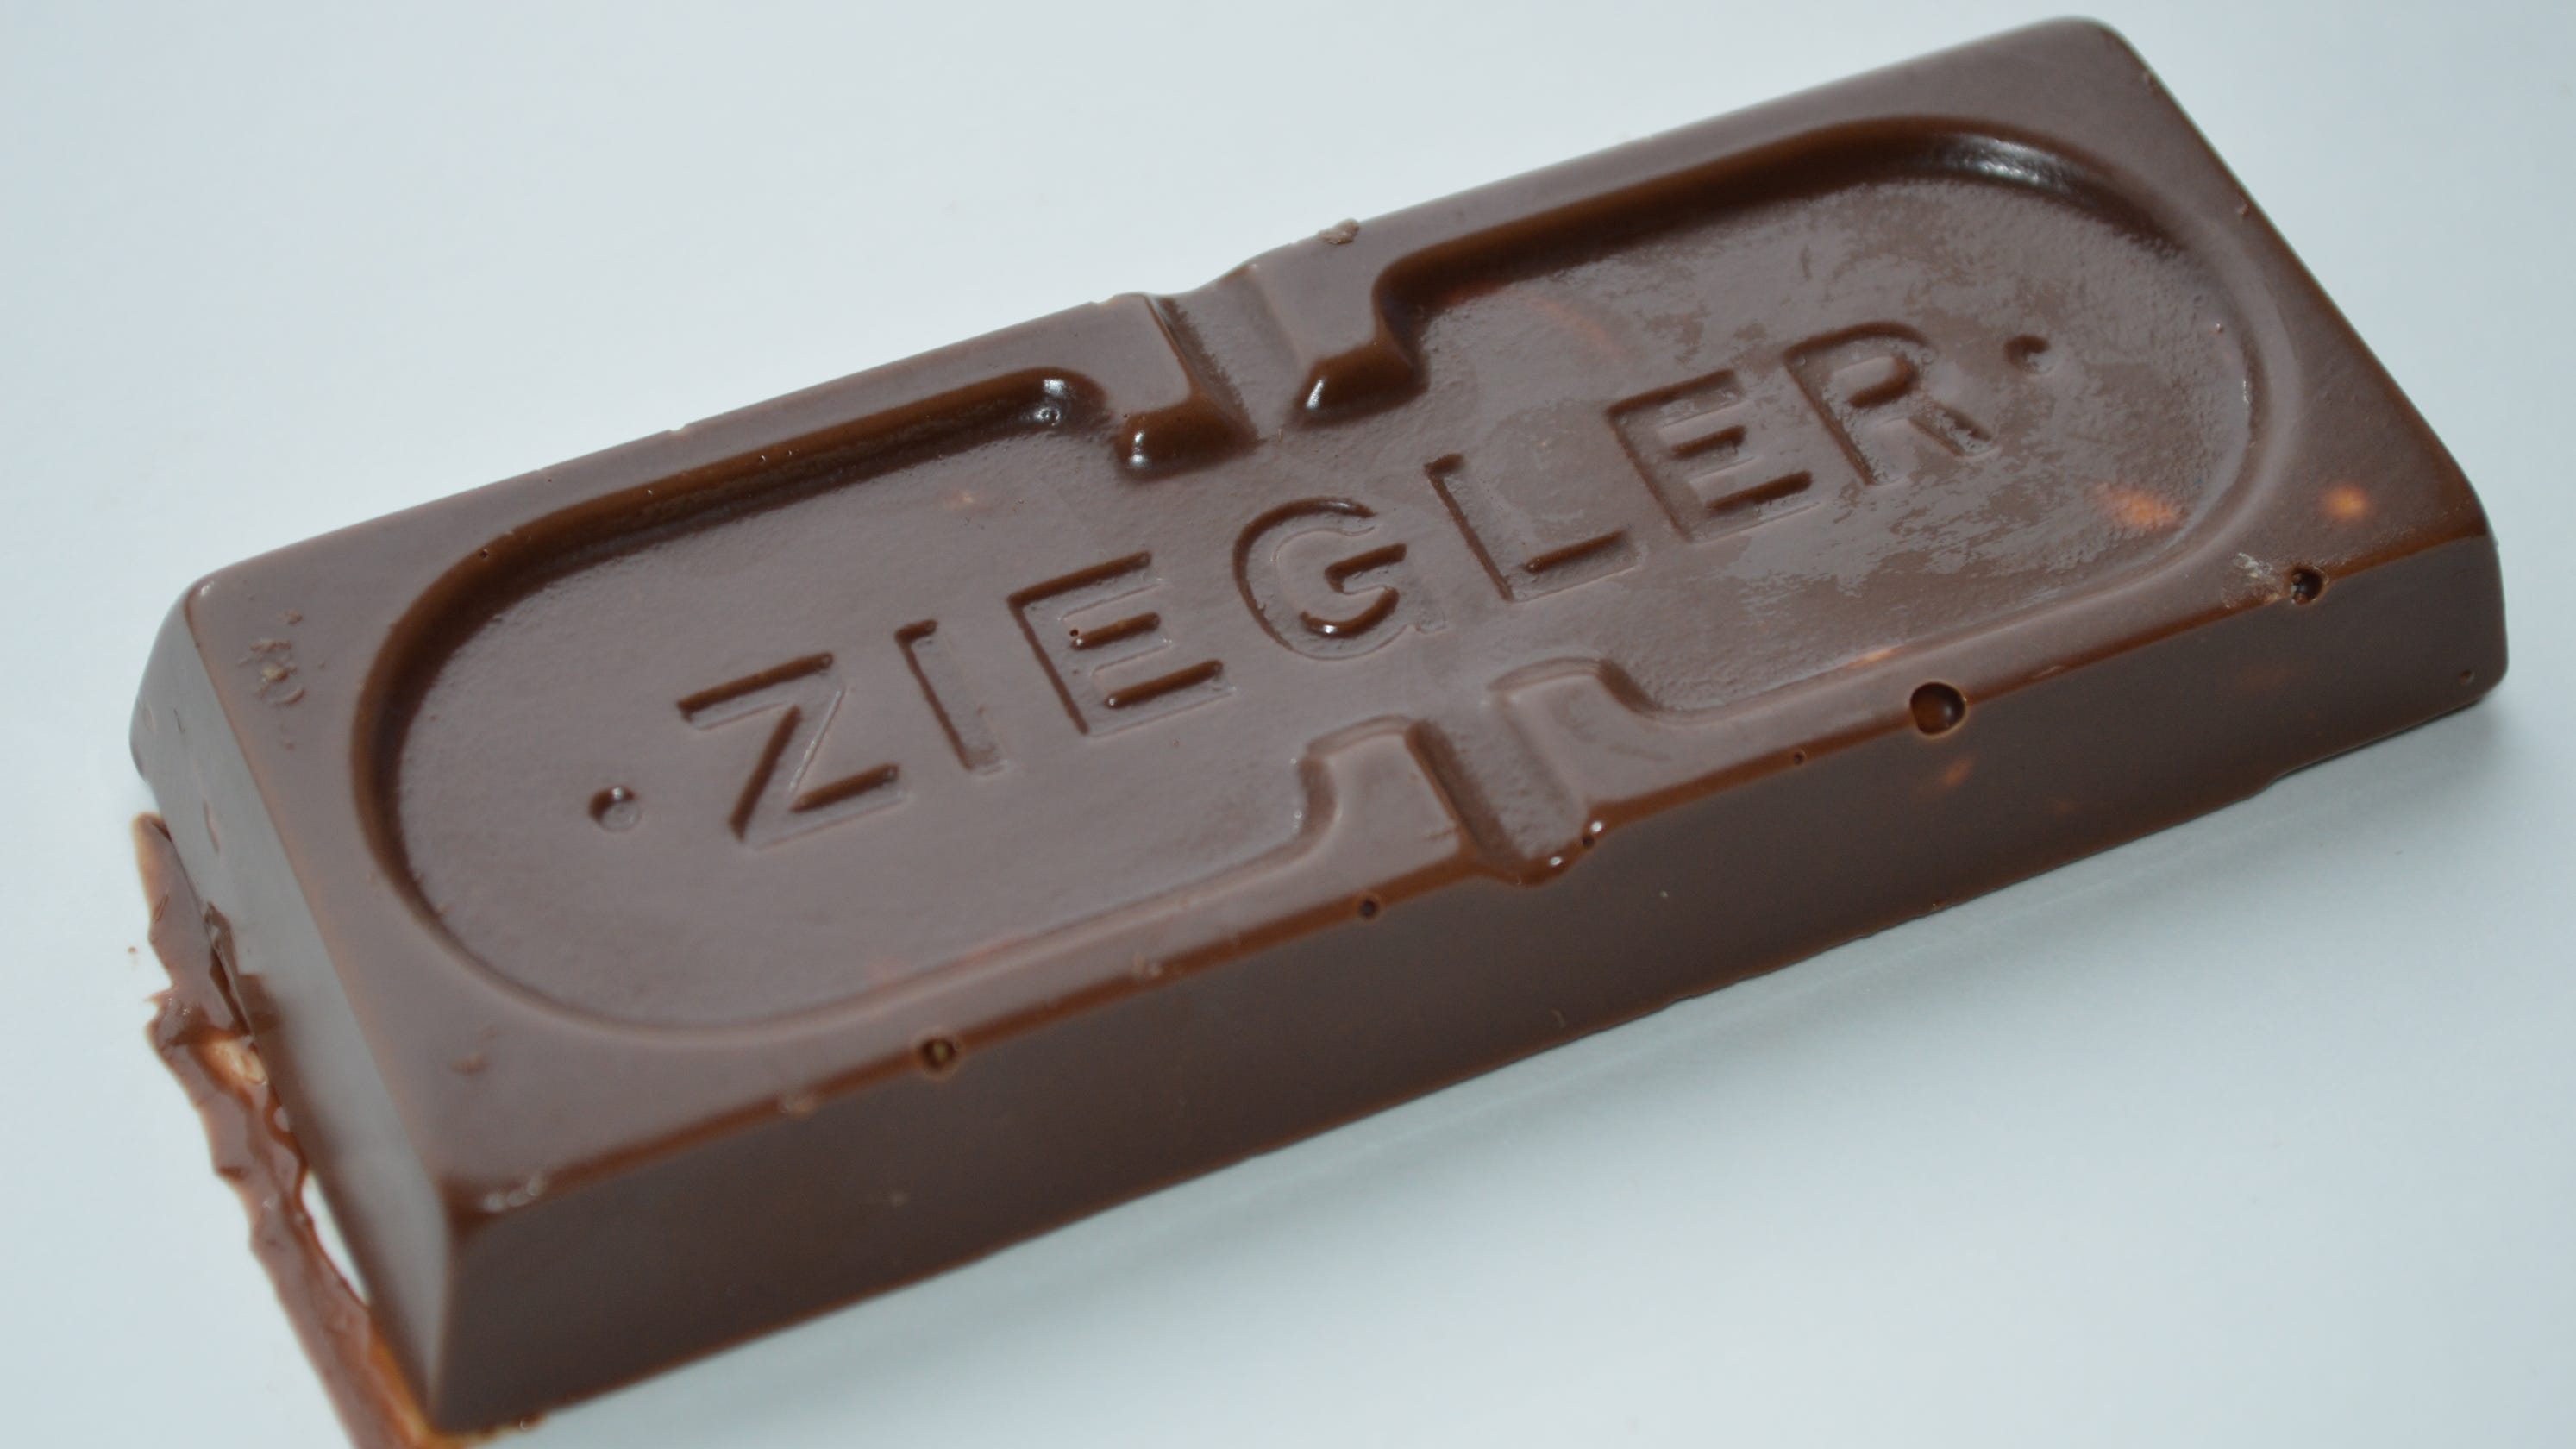 Half Nuts Is The Only Place That Carries Original Ziegler Giant Bar